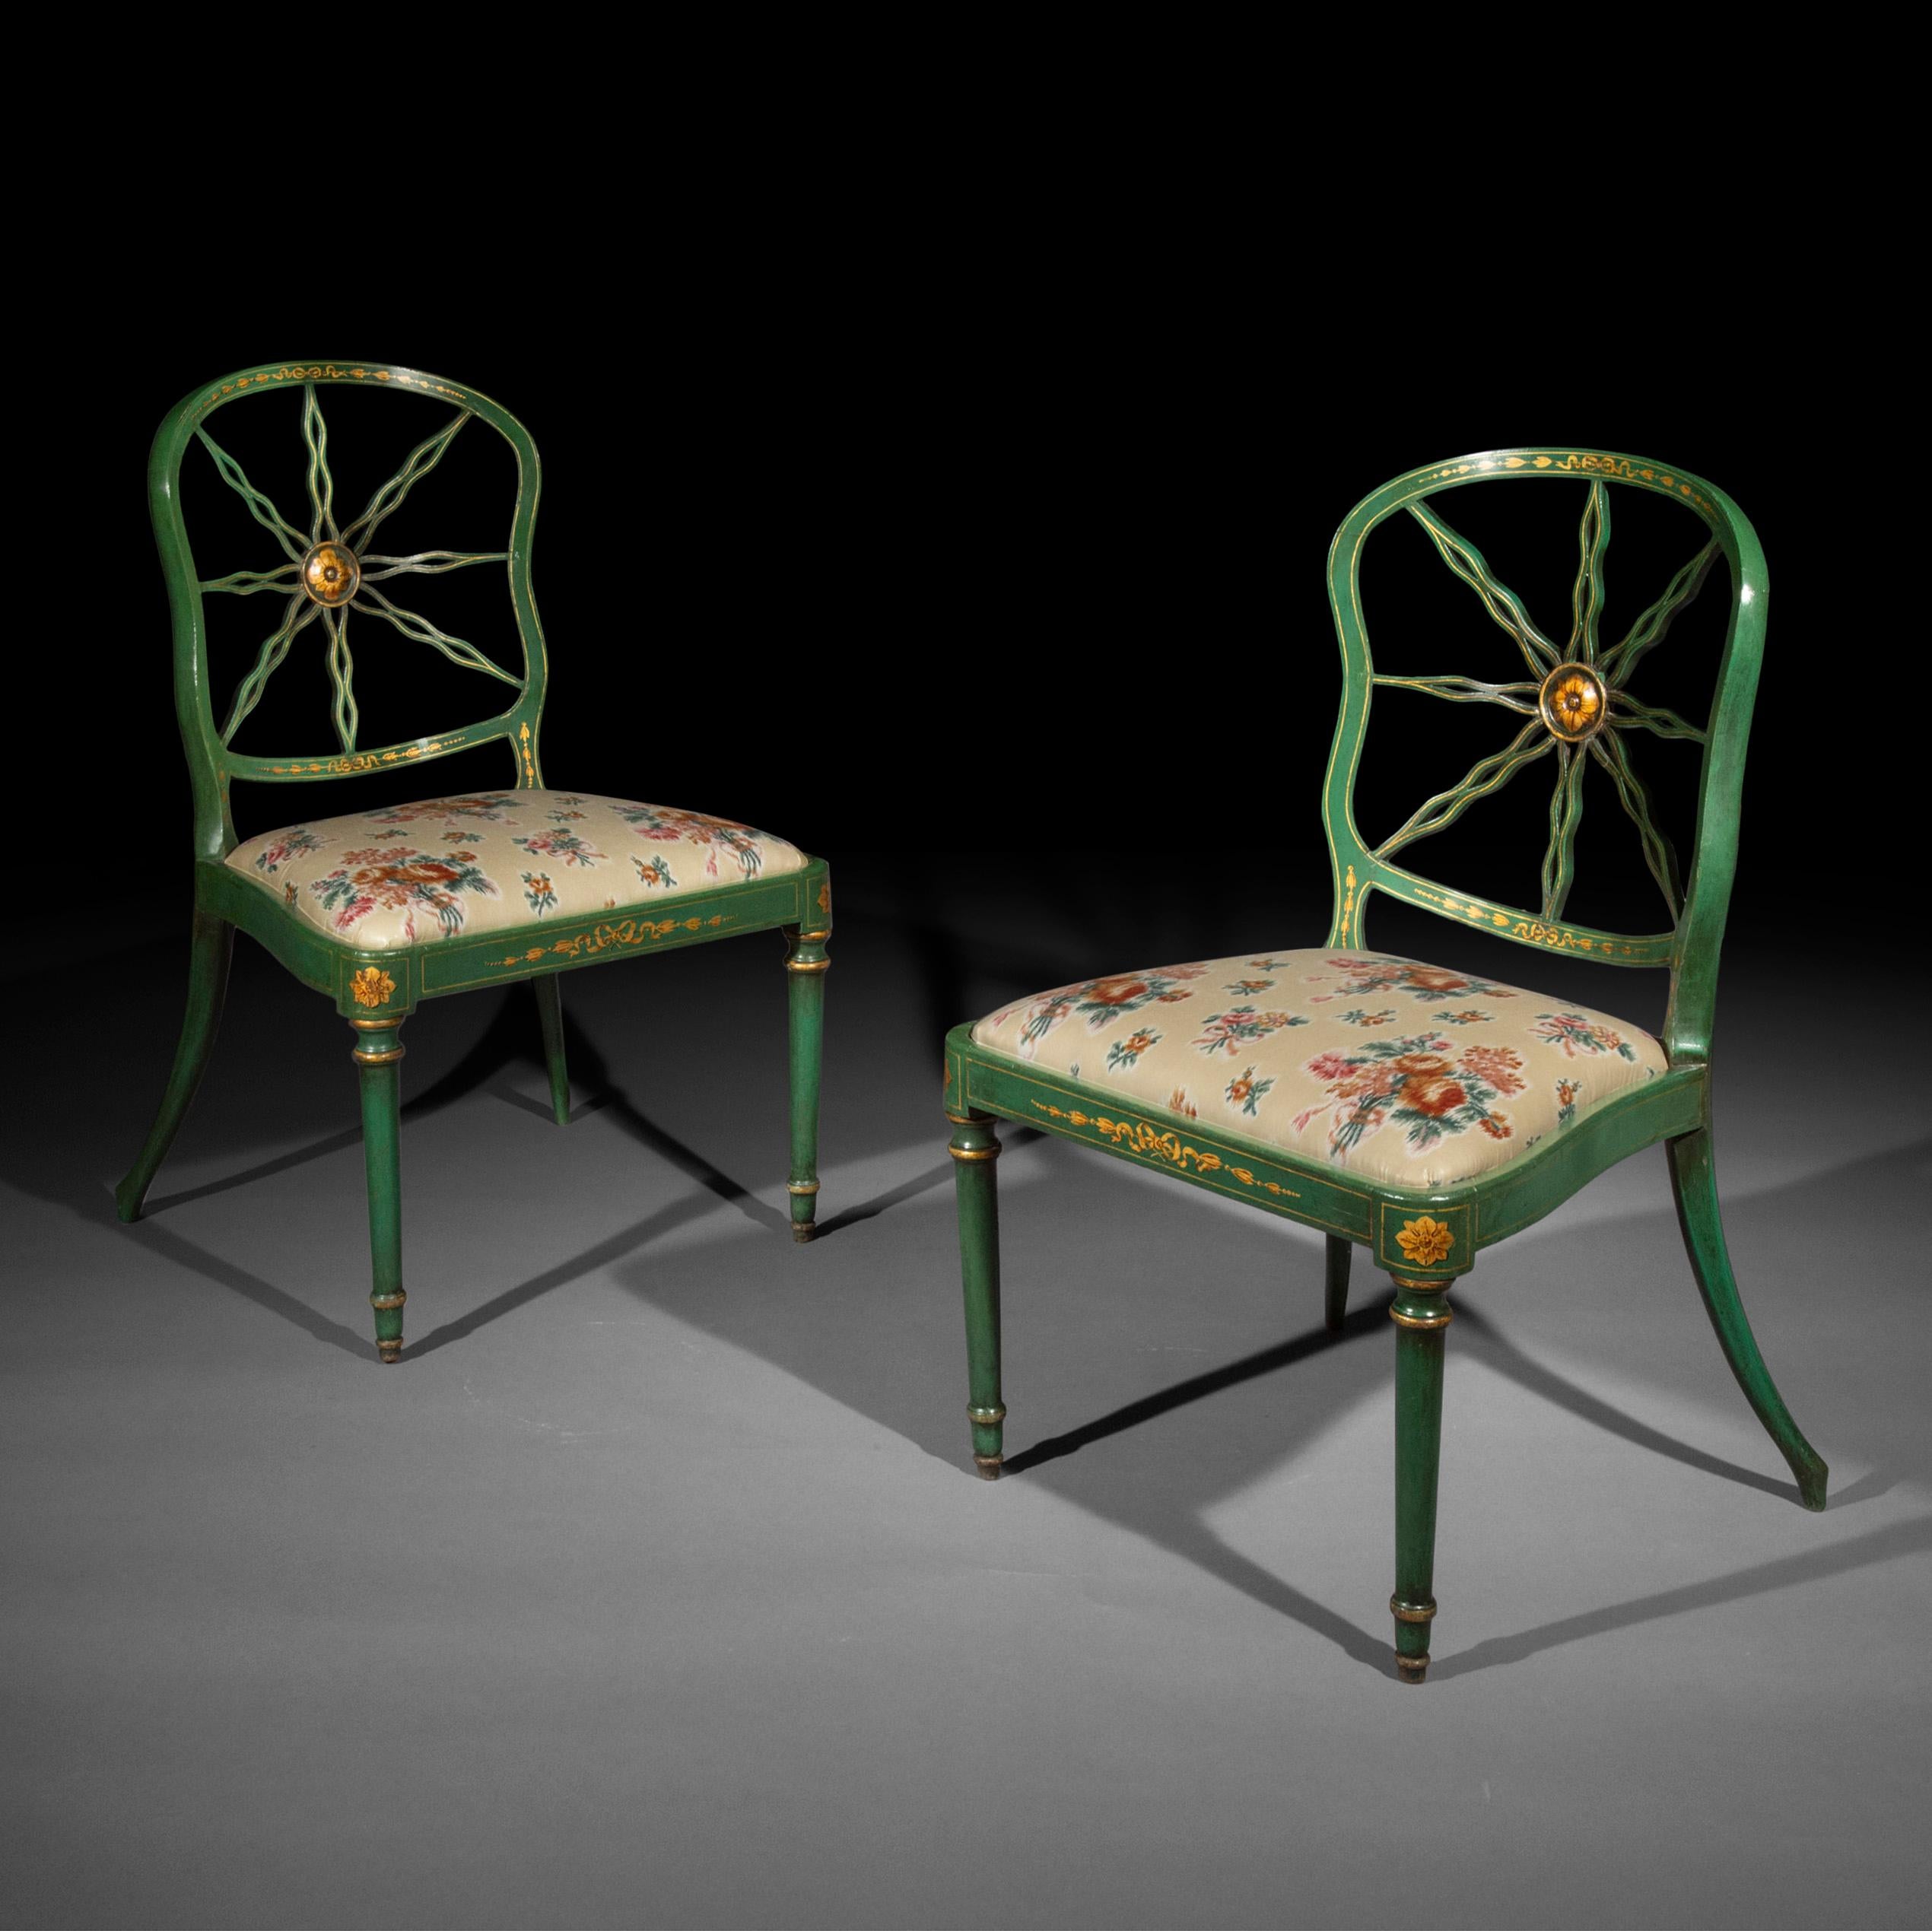 Pair of Antique Green Painted Chairs - 3 pairs available In Good Condition In Richmond, London